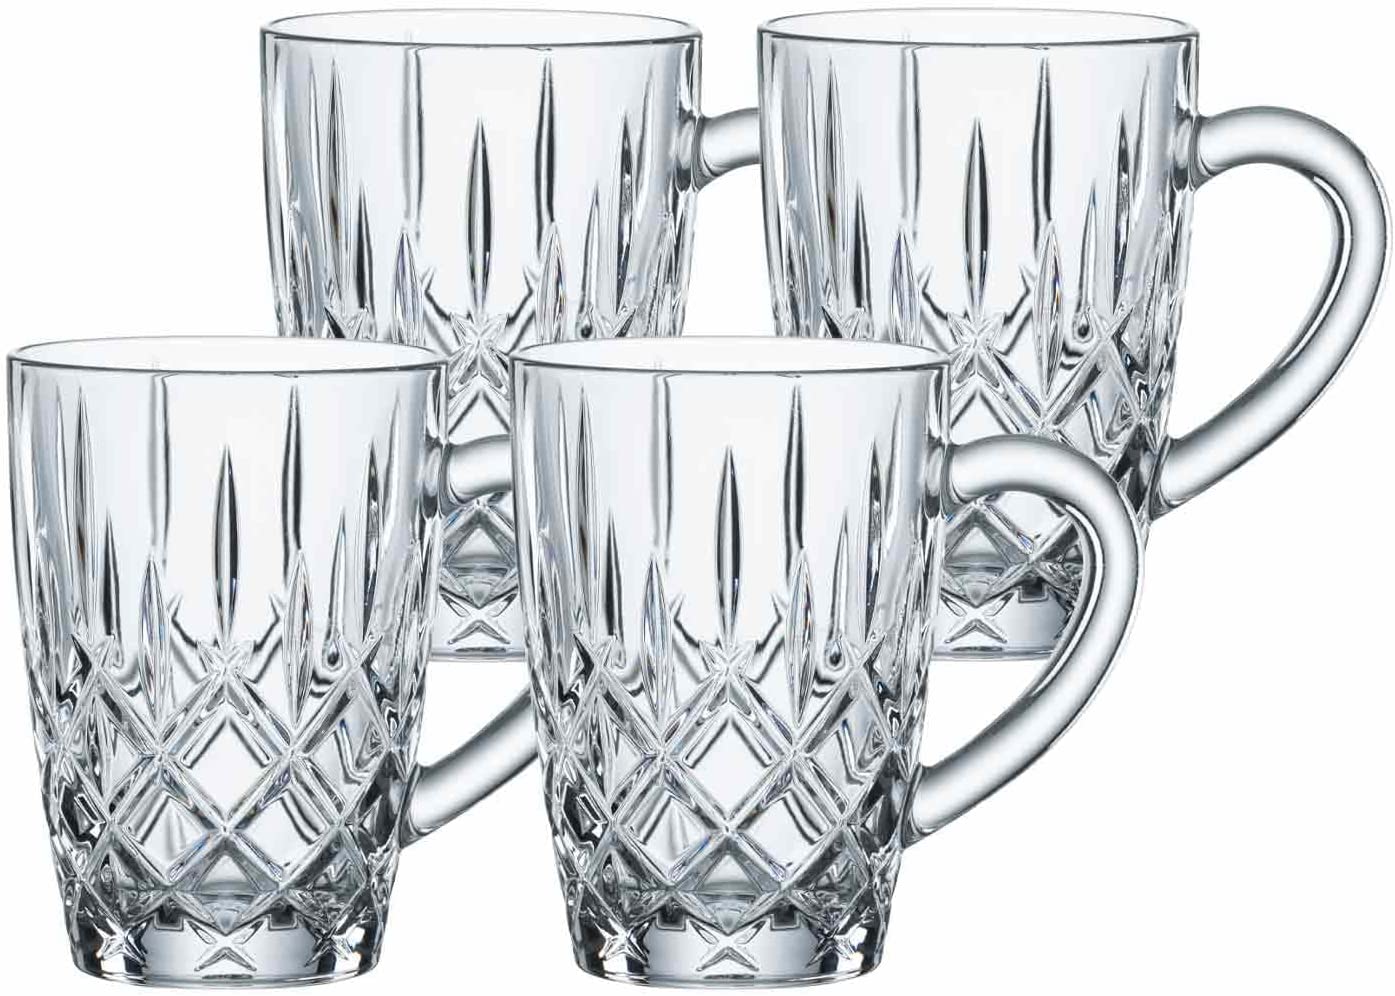 Spiegelau & Nachtmann Noblesse Cups for Hot Drinks Set of 4 [SP]